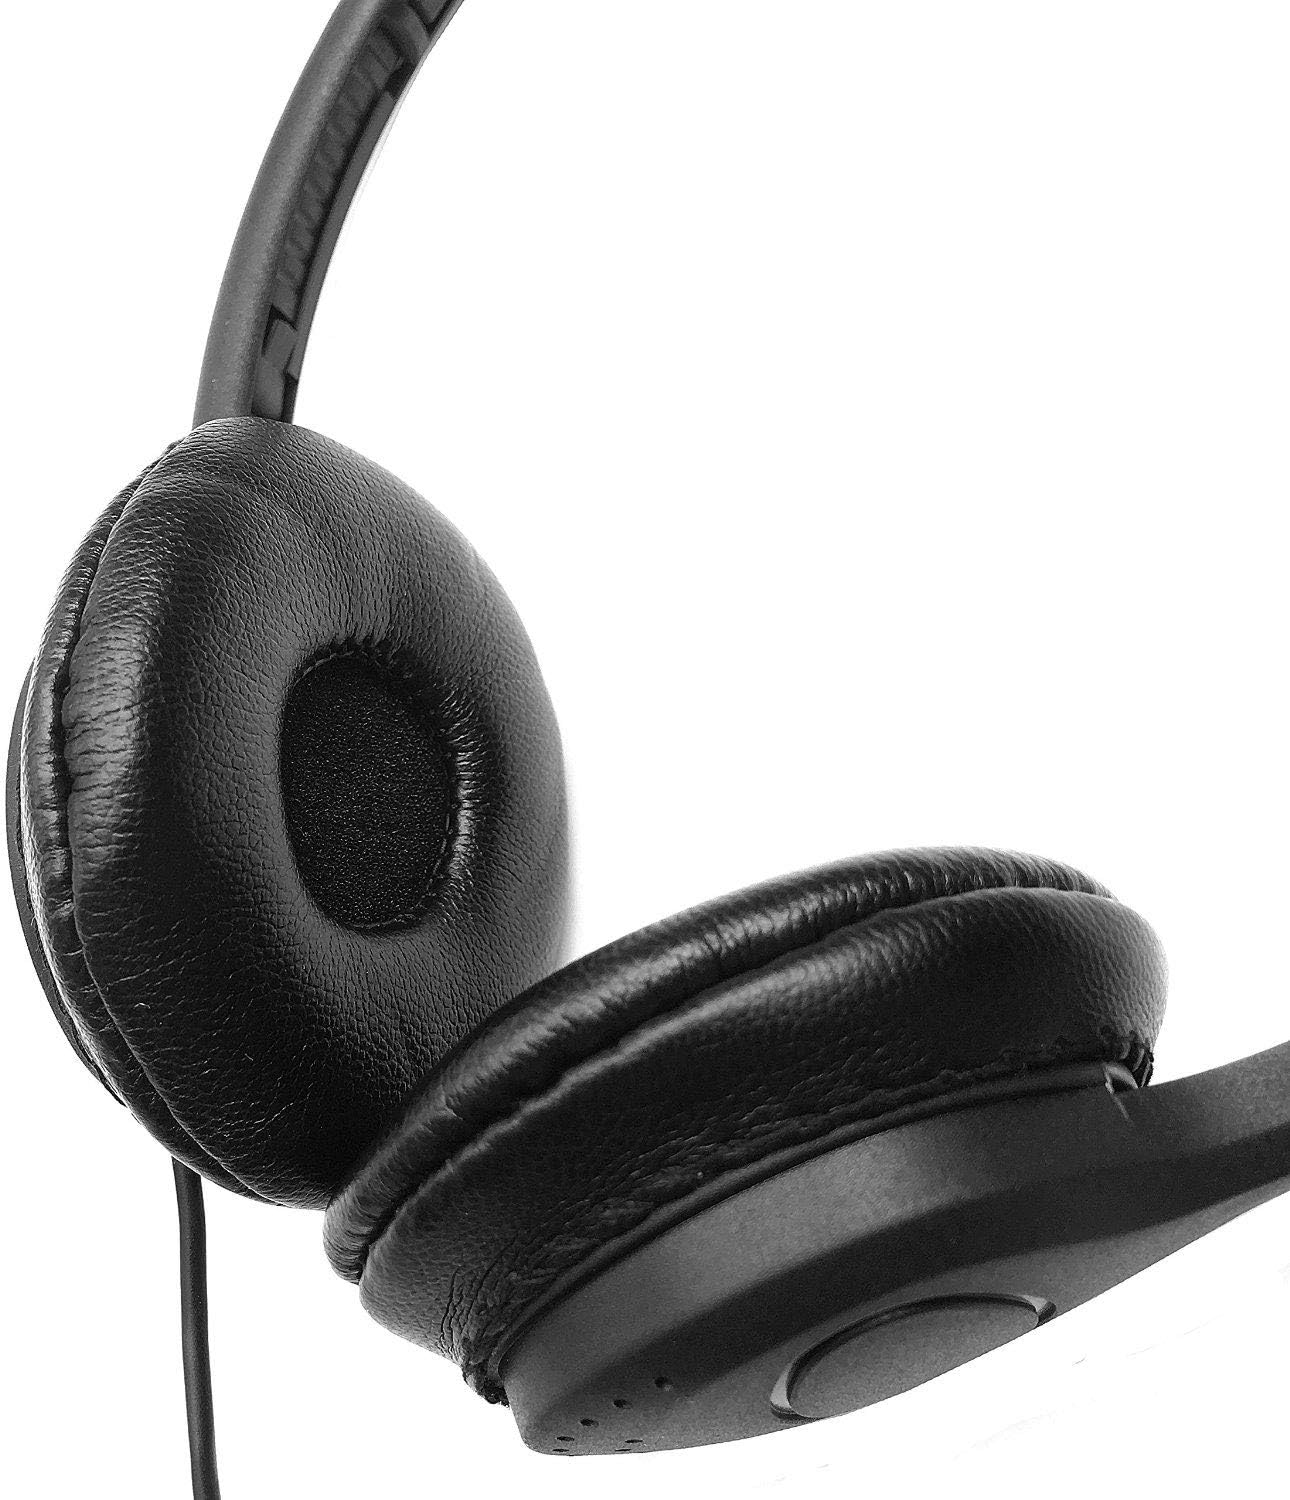 Detailed View of Soft Leatherette Ear Cushions on SmithOutlet Bulk Headphones